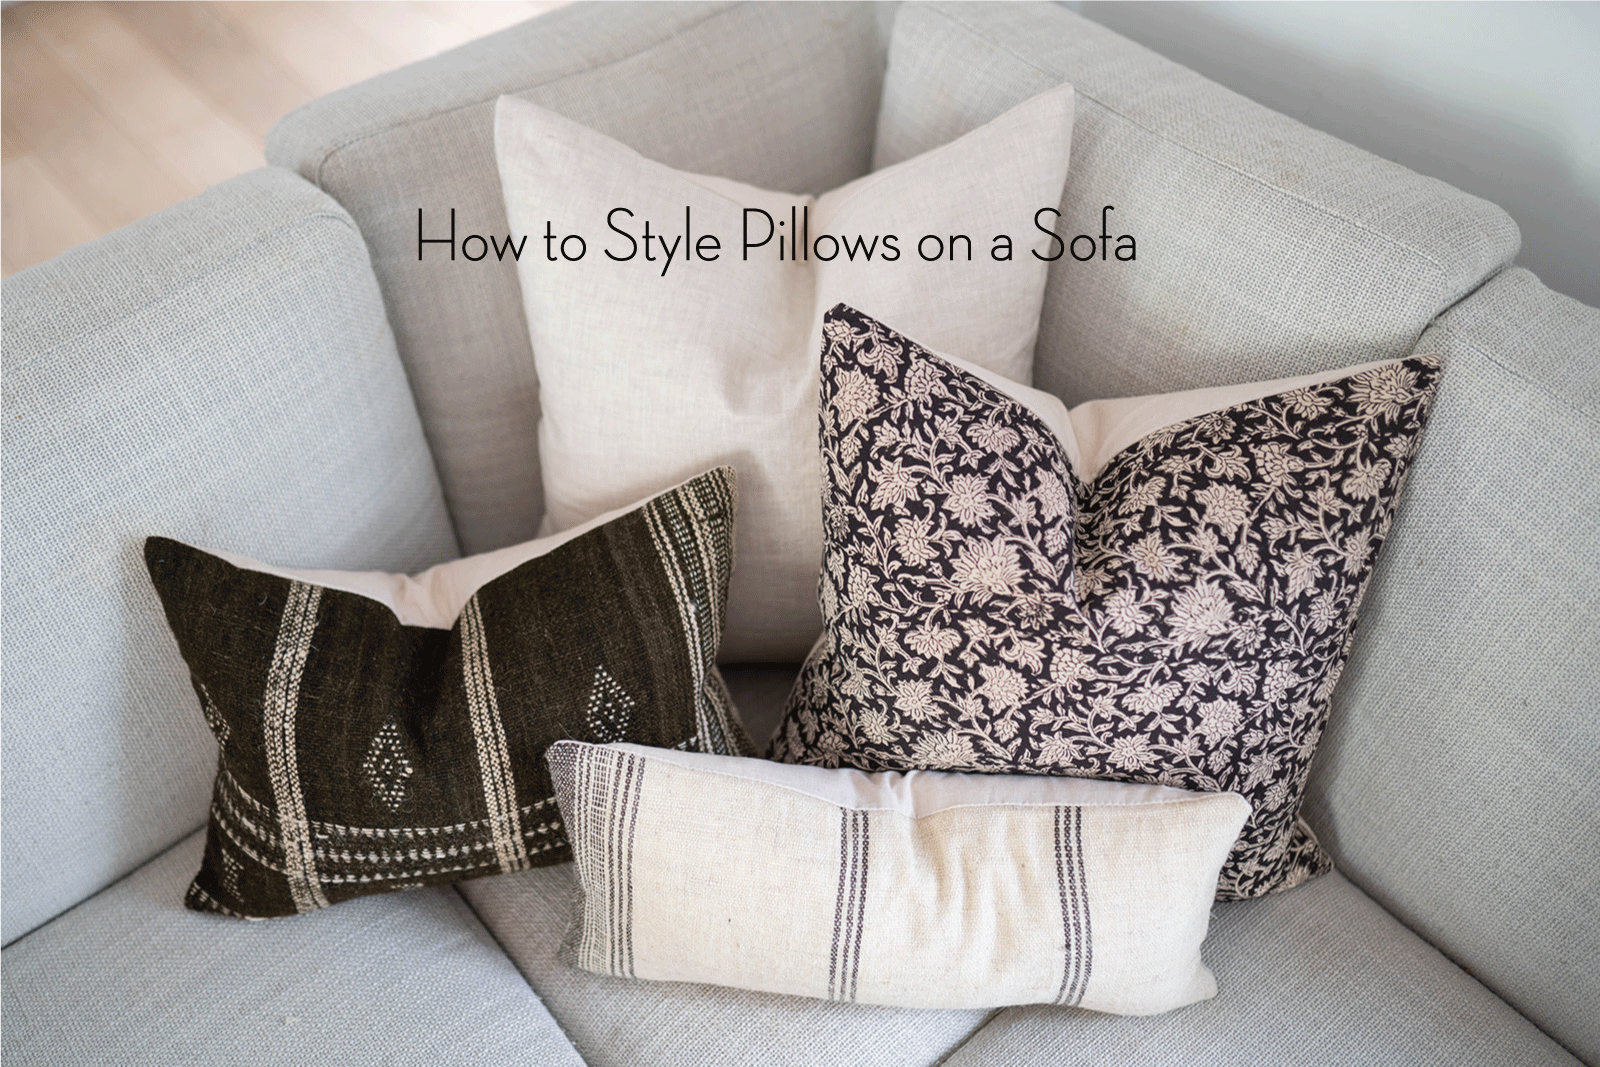 How to Style Pillows on a Sofa